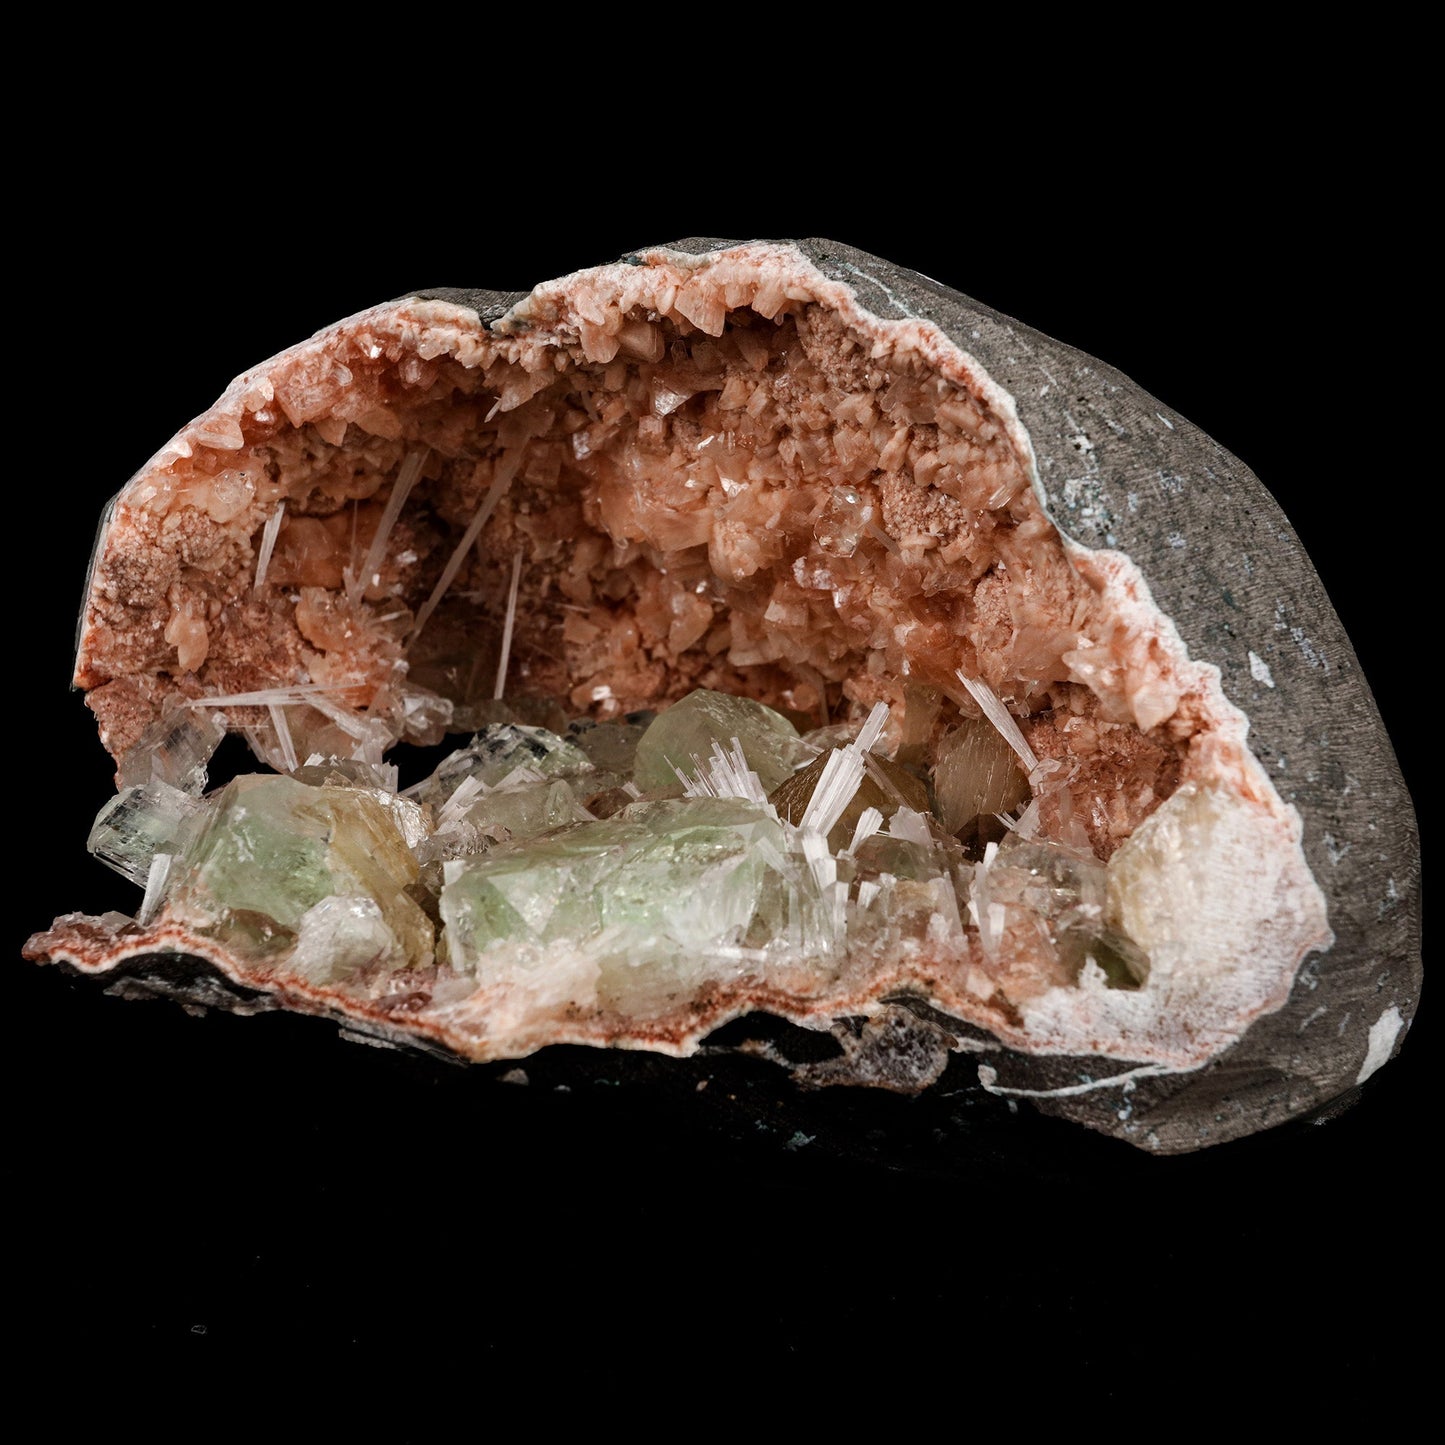 Green Apophyllite Crystals Inside Heulandite Geode Natural Mineral Spe…  https://www.superbminerals.us/products/green-apophyllite-crystals-inside-heulandite-geode-natural-mineral-specimen-b-5254  Features: This beautiful display specimen is a feast of color, texture, and reflections of light. Apophyllite crystals have a high luster on their sides, which contrasts beautifully with their flat, pearl-like terminations. Several acicular sprays of colorless to white, satin and Scolecite. Through the Apophyllite